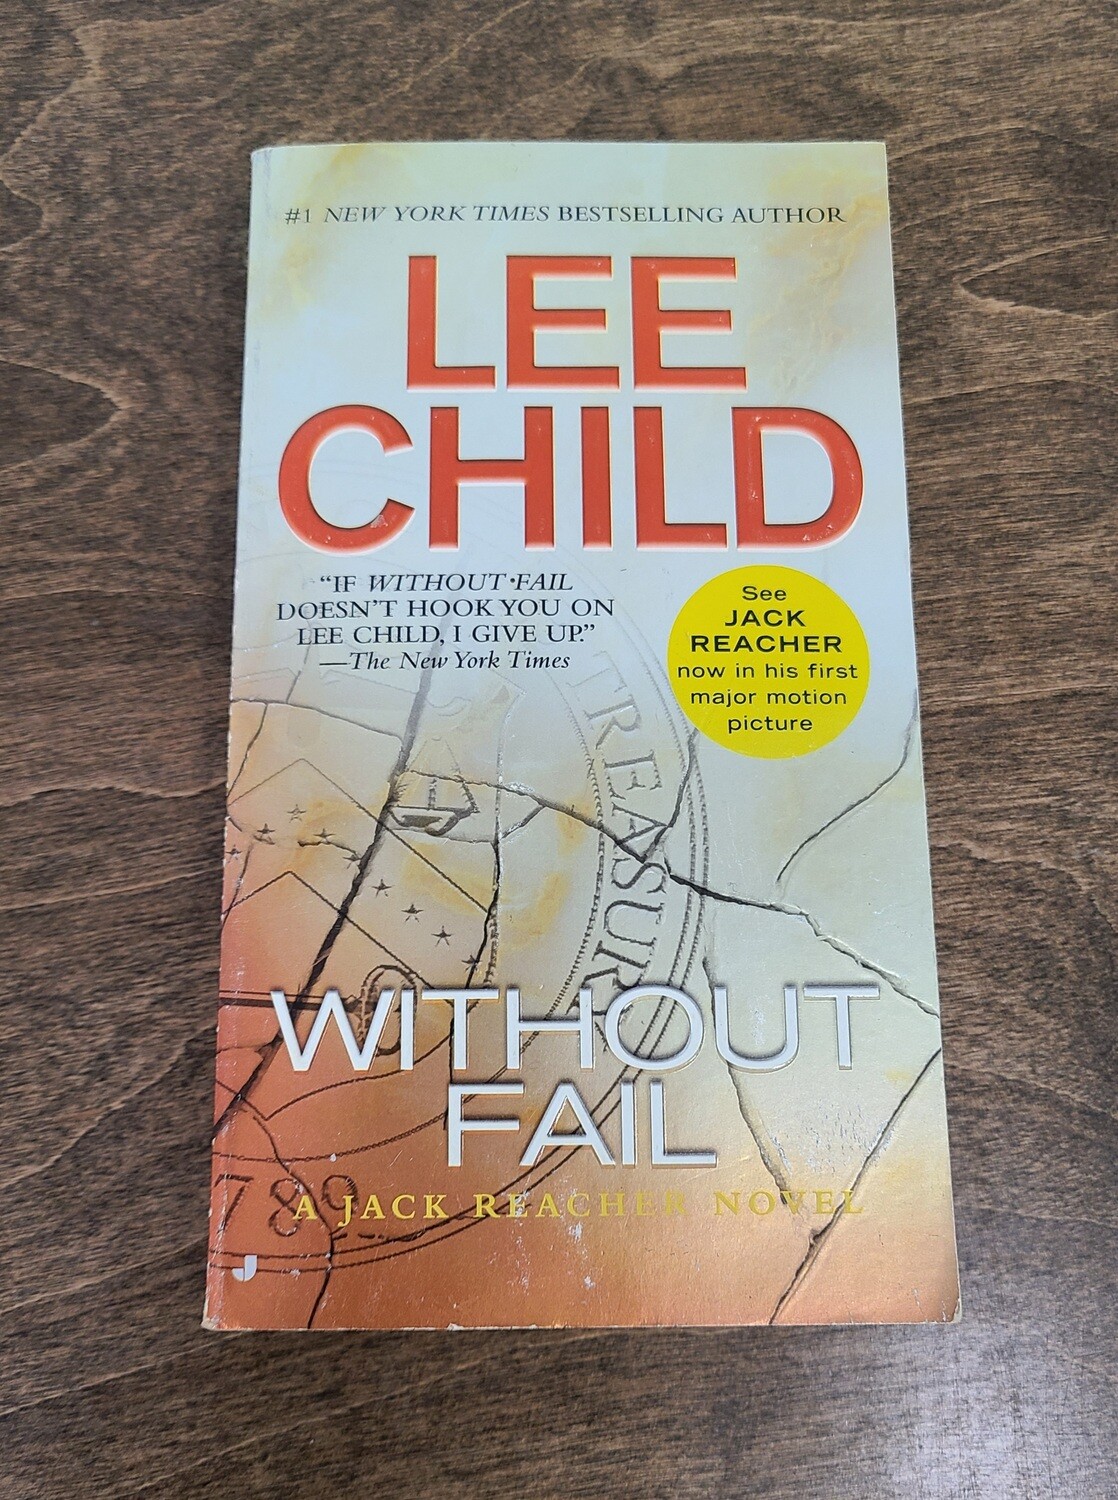 Without Fail by Lee Child